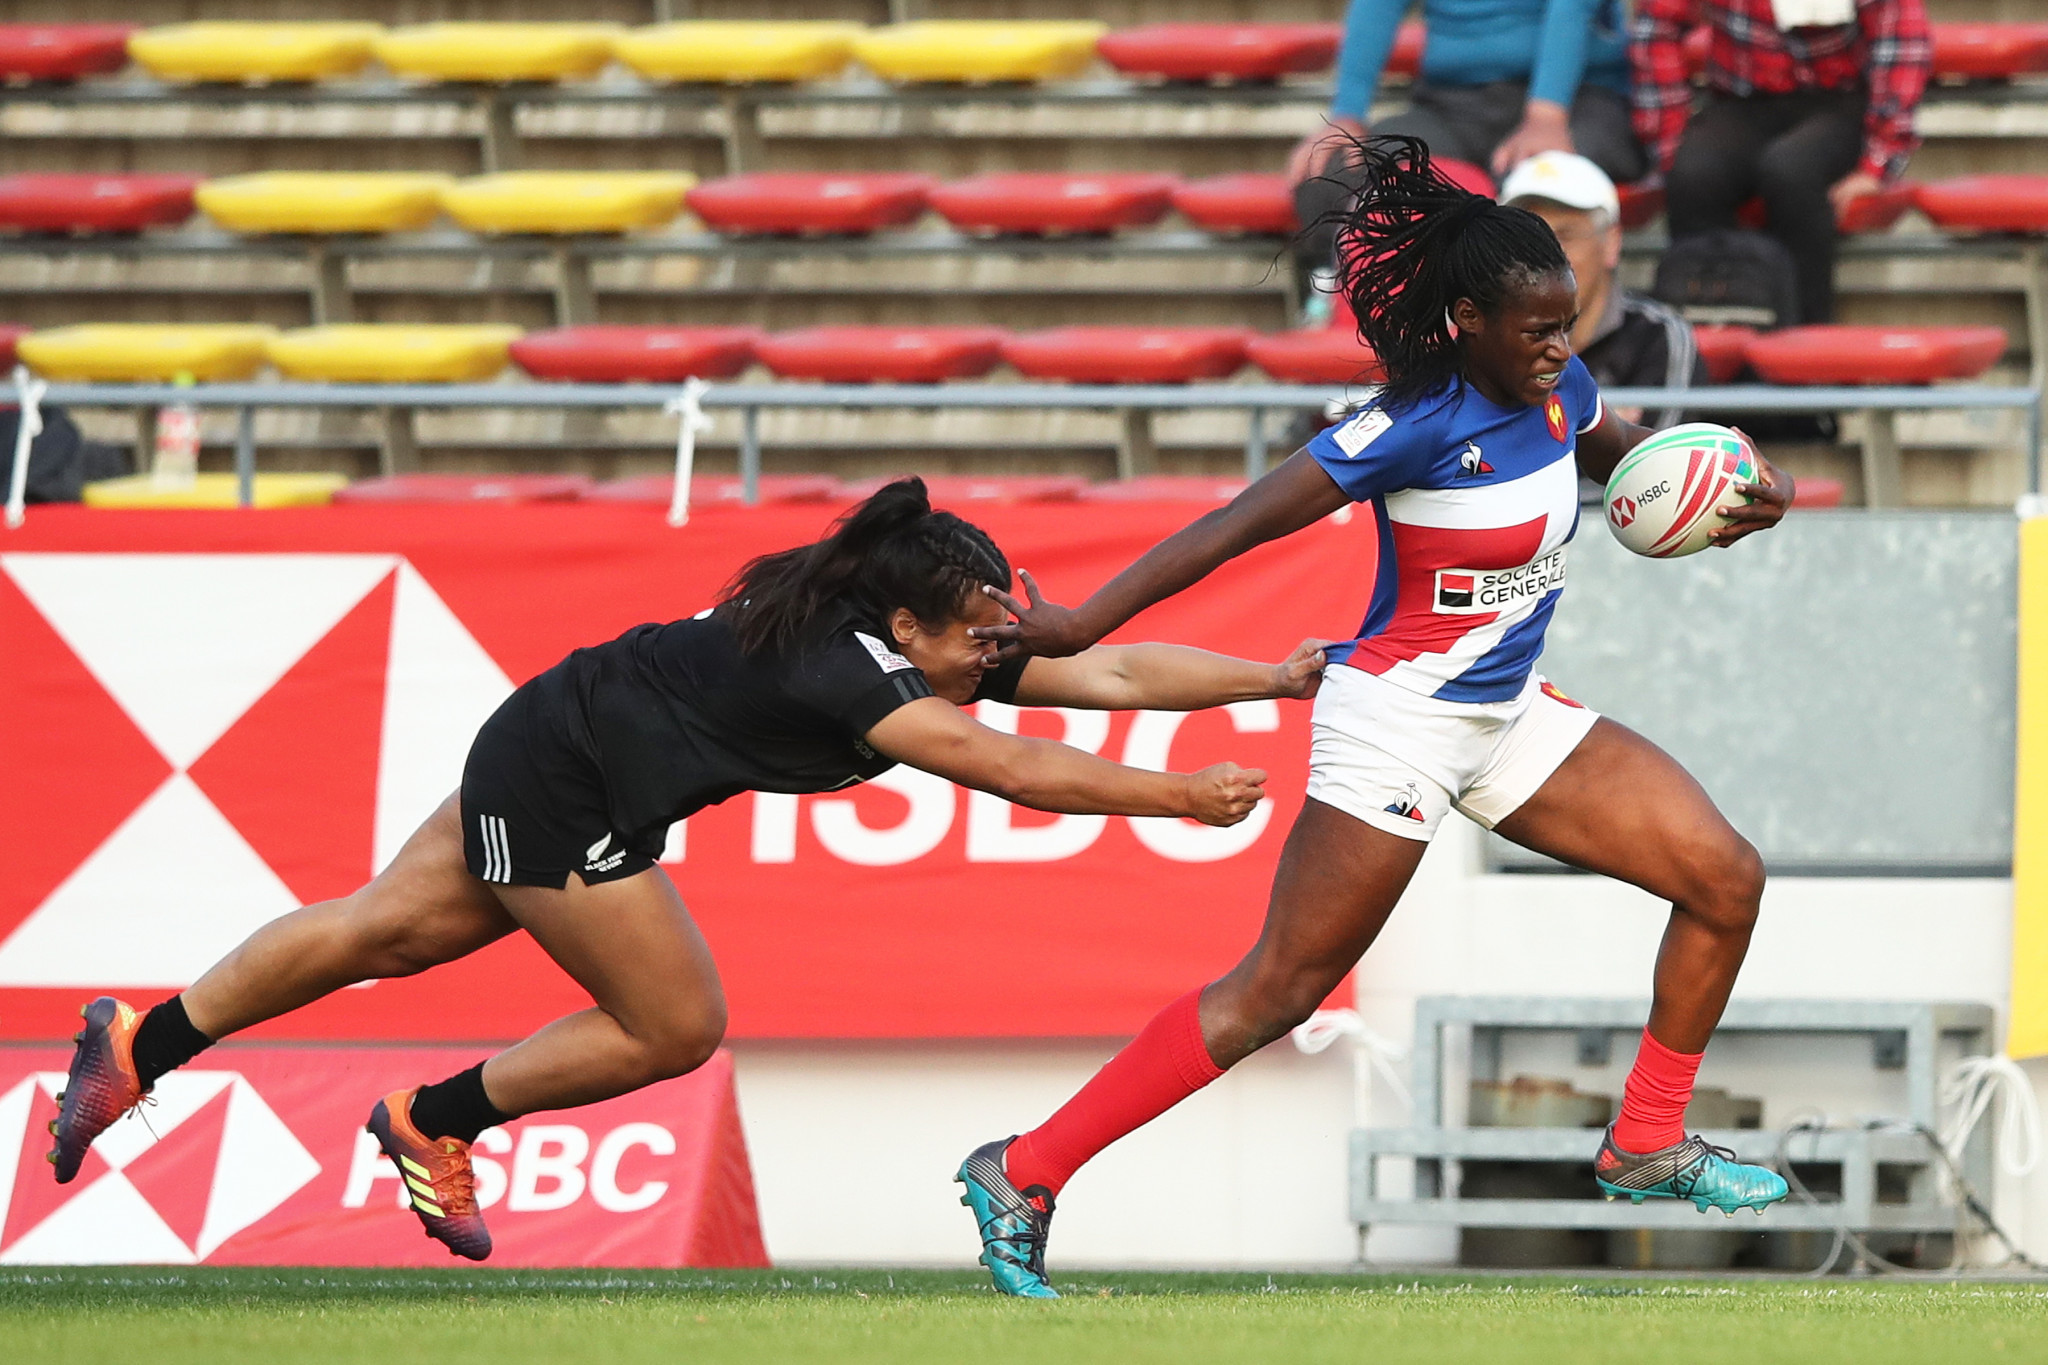 New Zealand's record run stopped by France at World Rugby Sevens Series in Kitakyushu